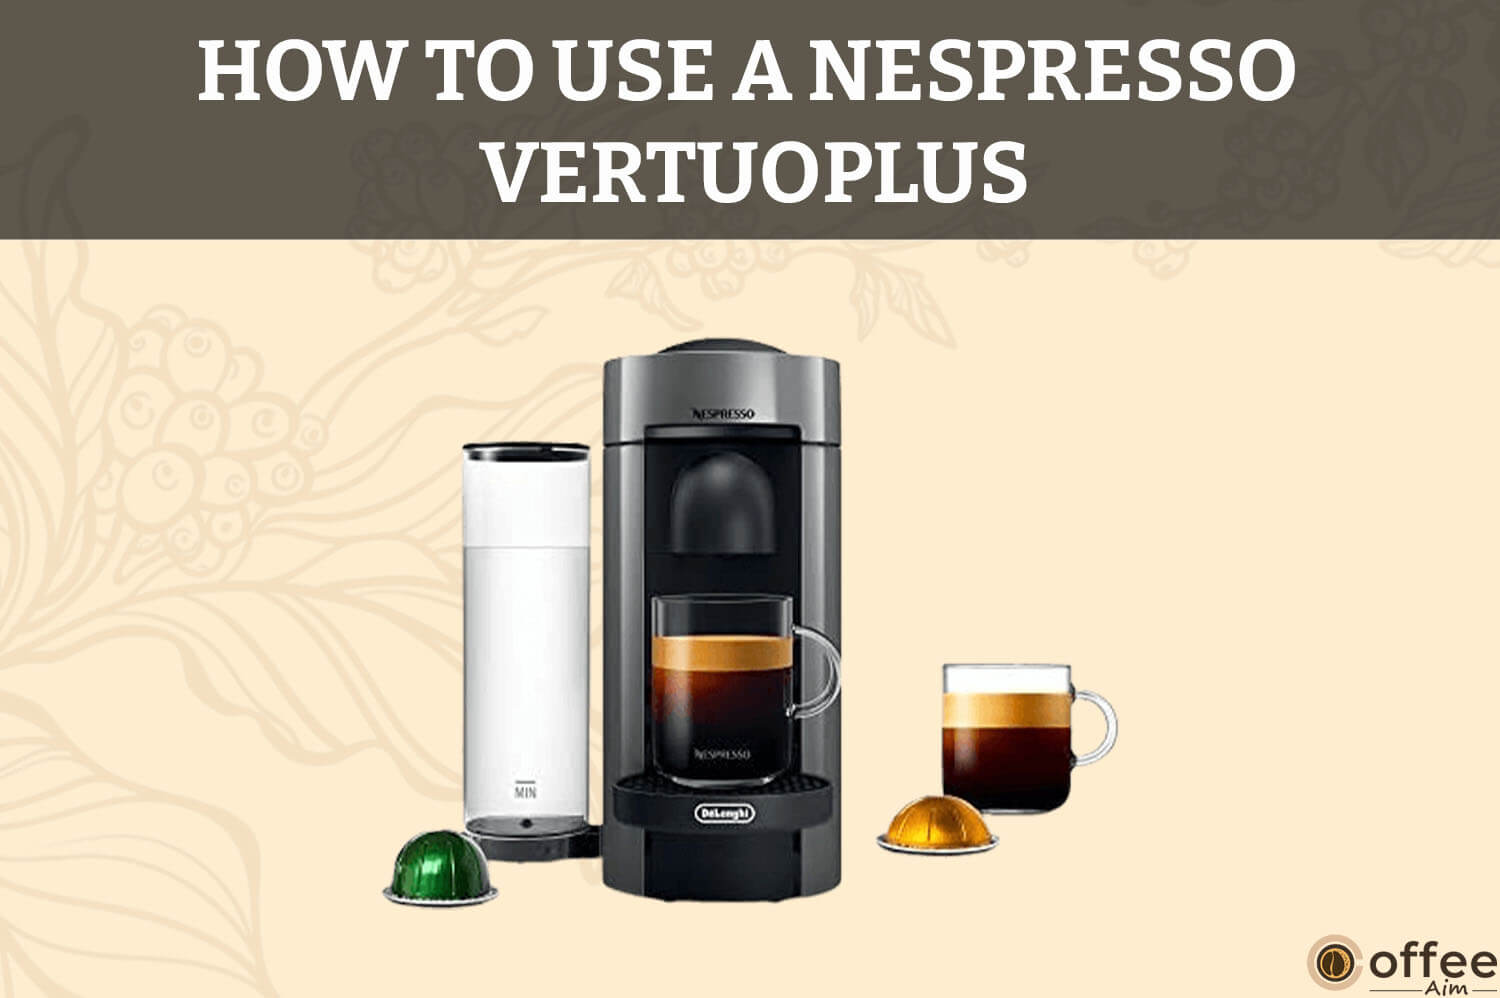 Featured image for the article "How to Use A Nespresso VertuoPlus"